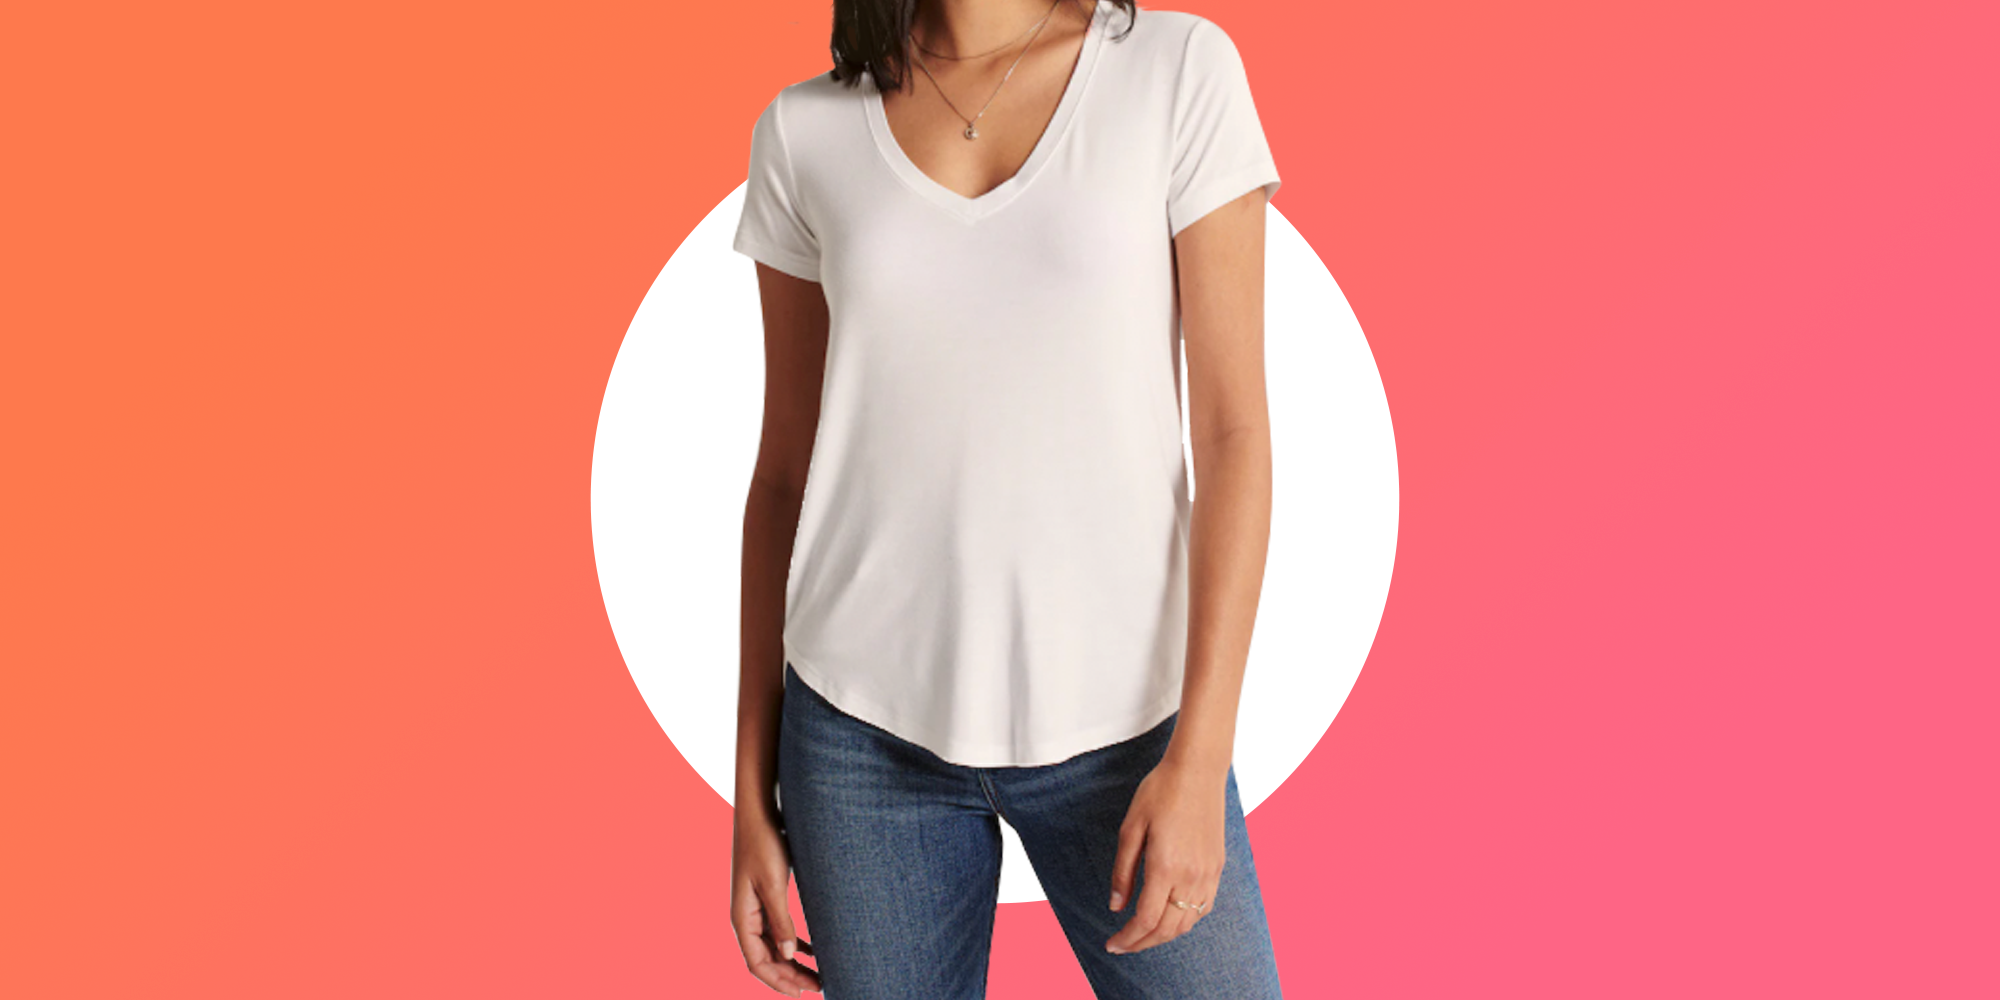 Women Ladies Causal Button Slim Blouse V-Neck Short Sleeve Solid White Women T-Shirts Tops